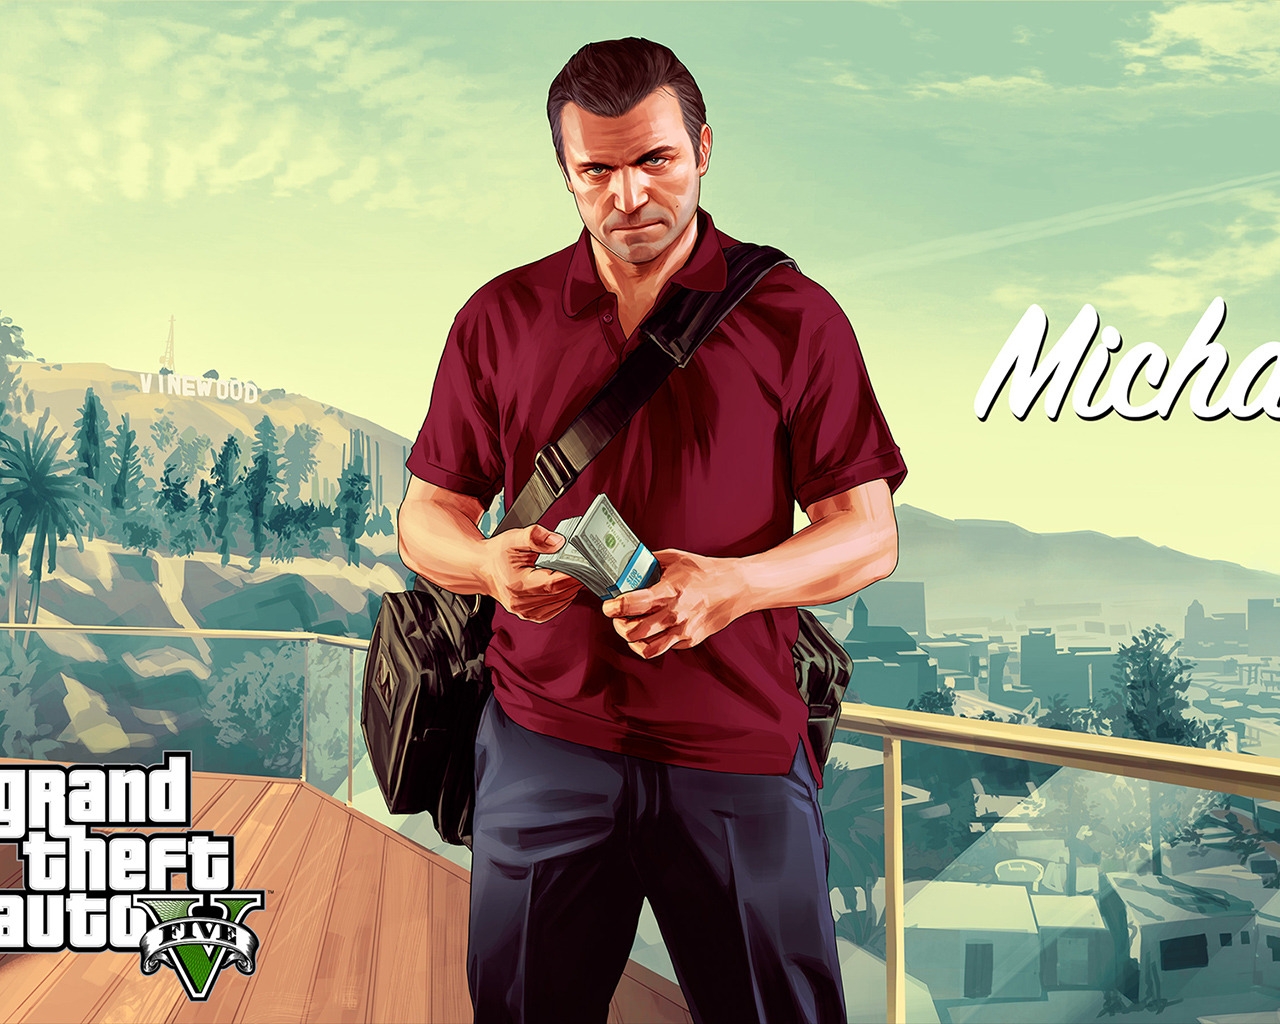 Michael with Money GTA V for 1280 x 1024 resolution